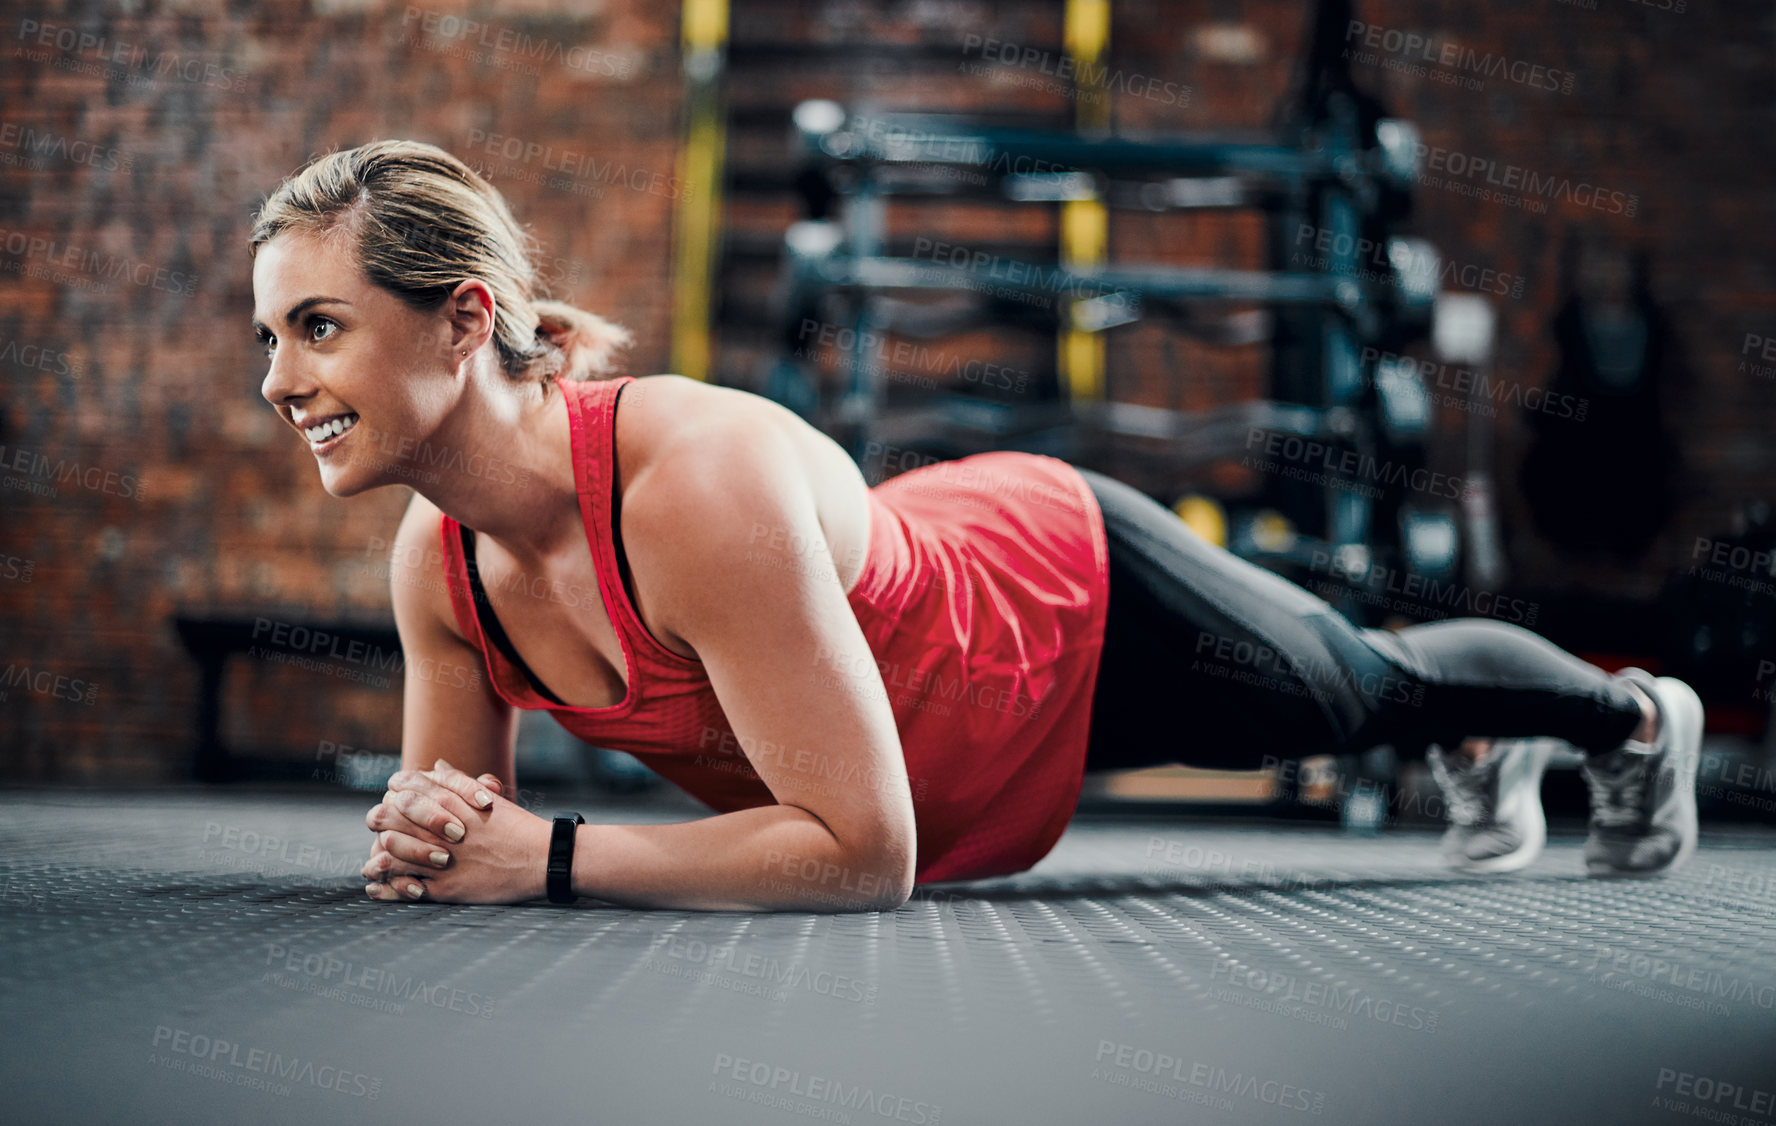 Buy stock photo Full length shot of an attractive young female athlete planking in the gym